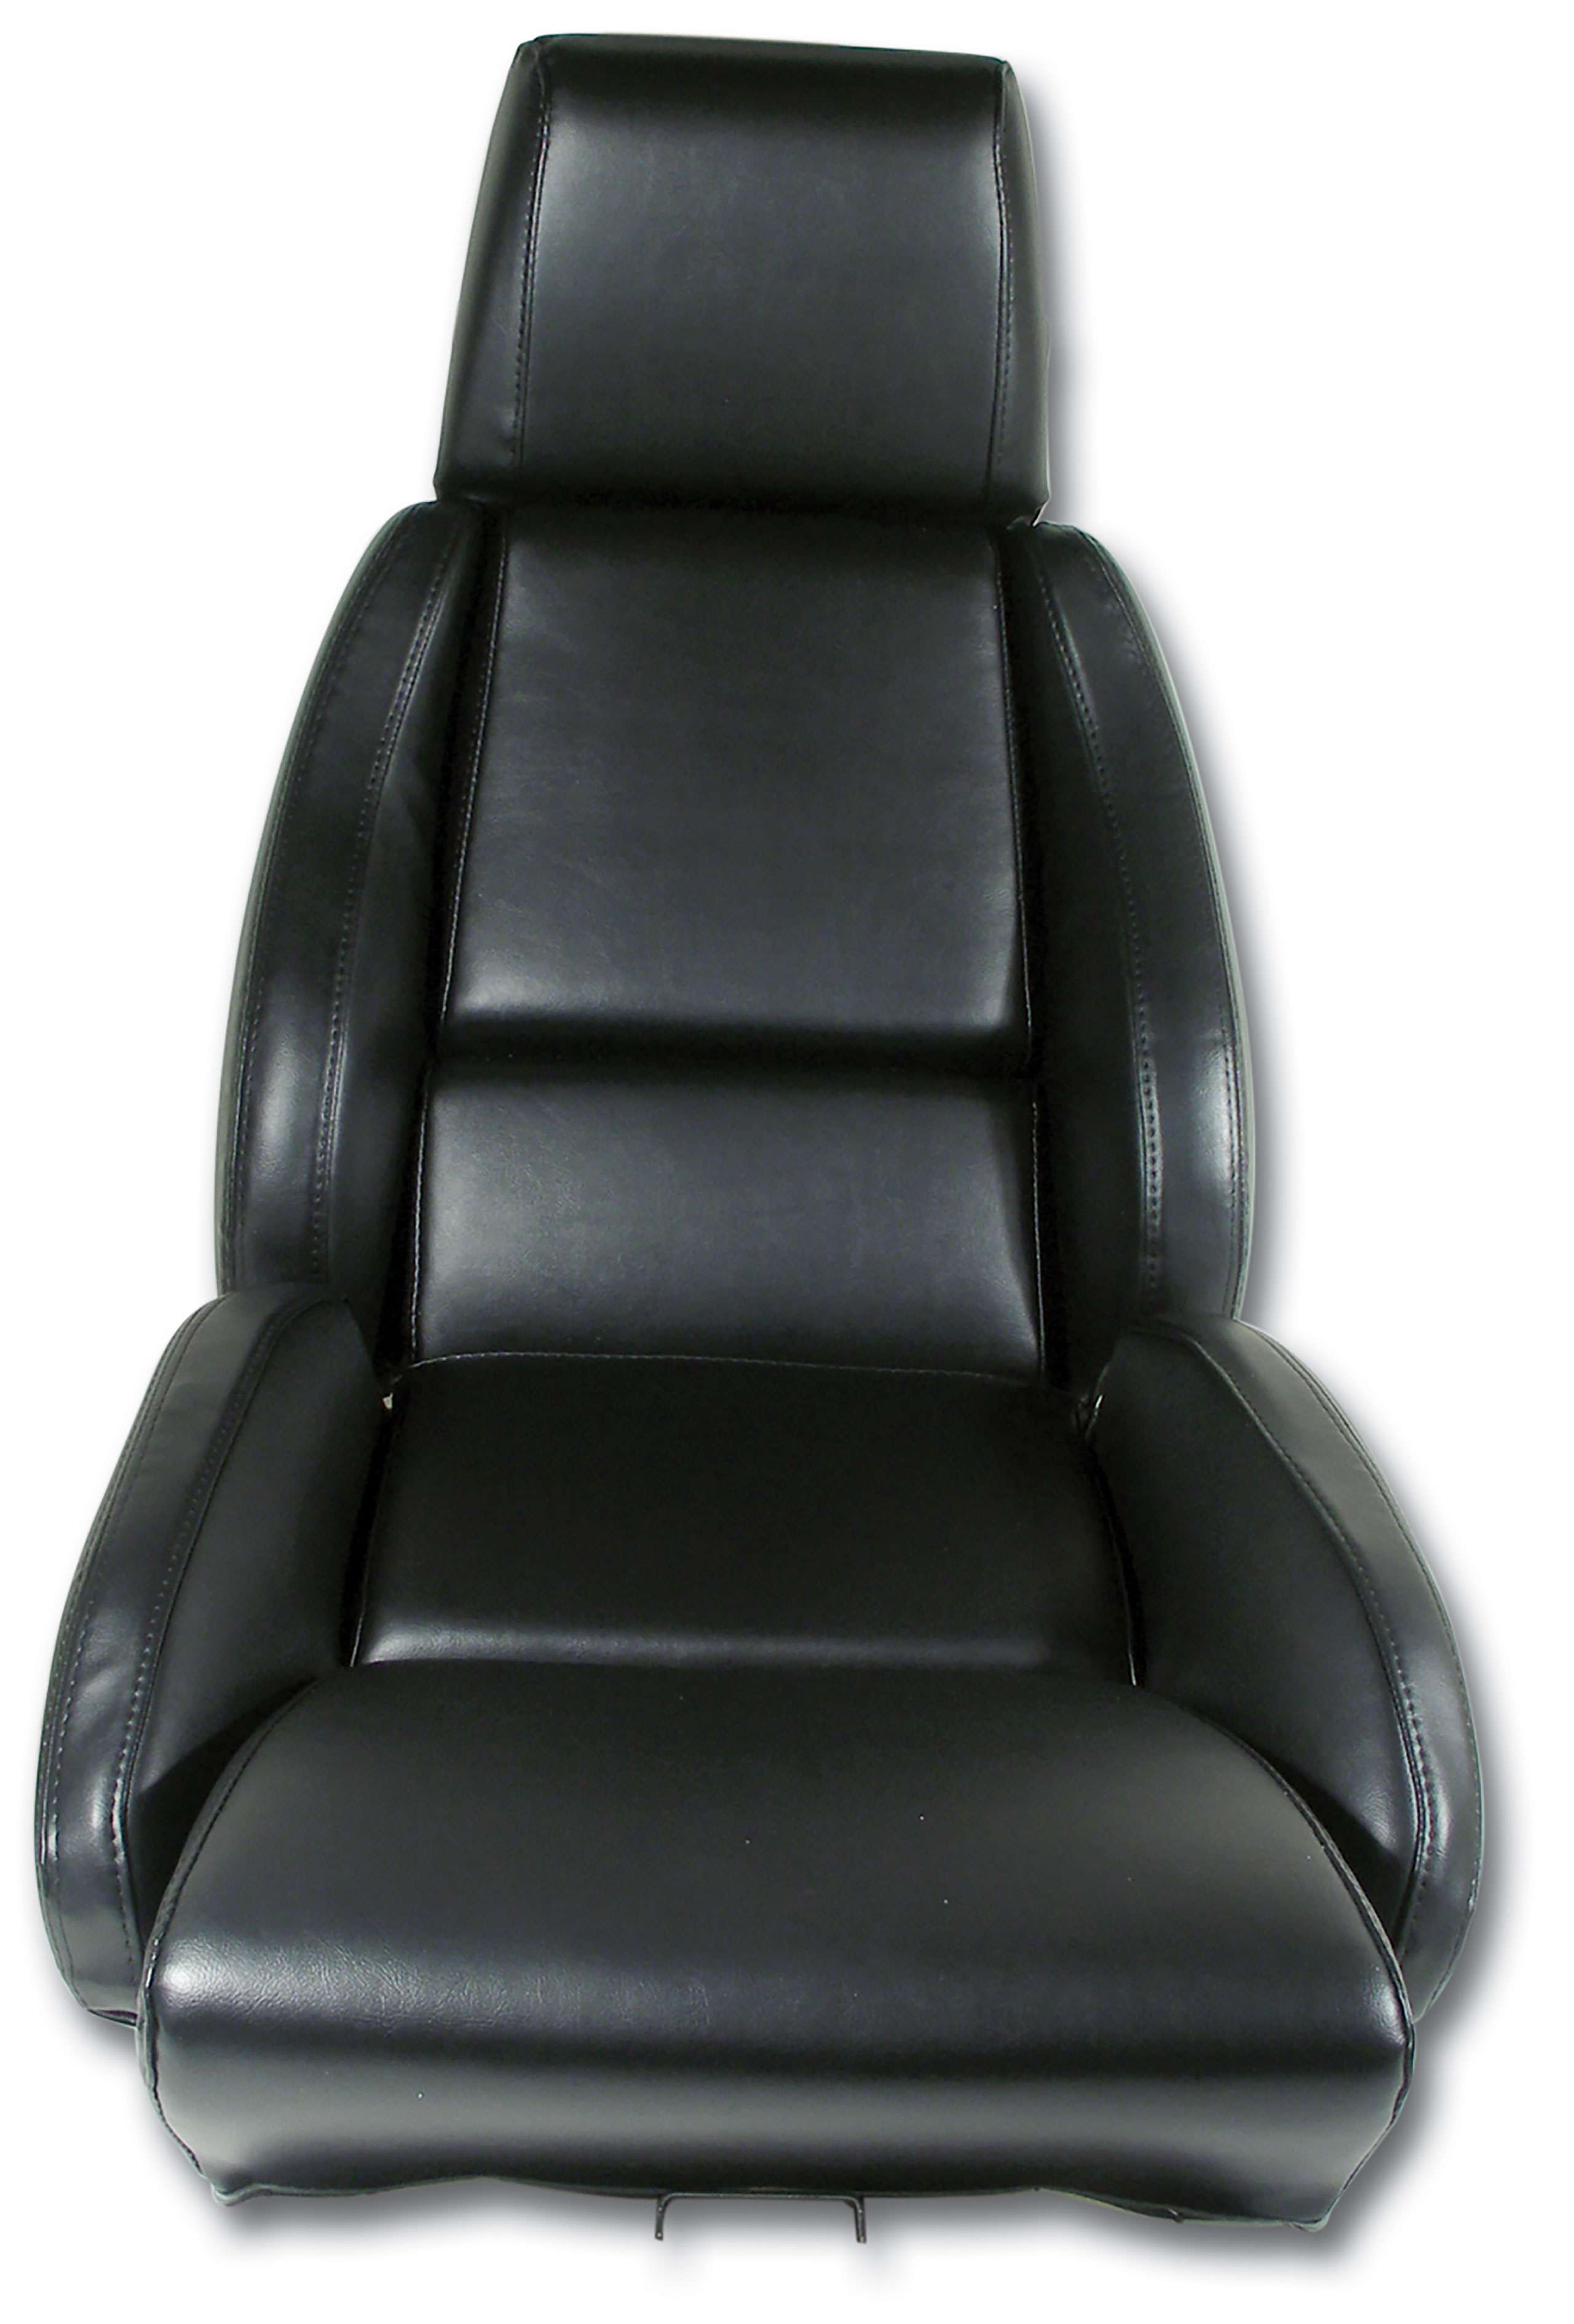 84-88 Corvette C4 468420 OE Style 100% Leather Standard Seat Covers W/O Perforated Inserts Black CA-468720 